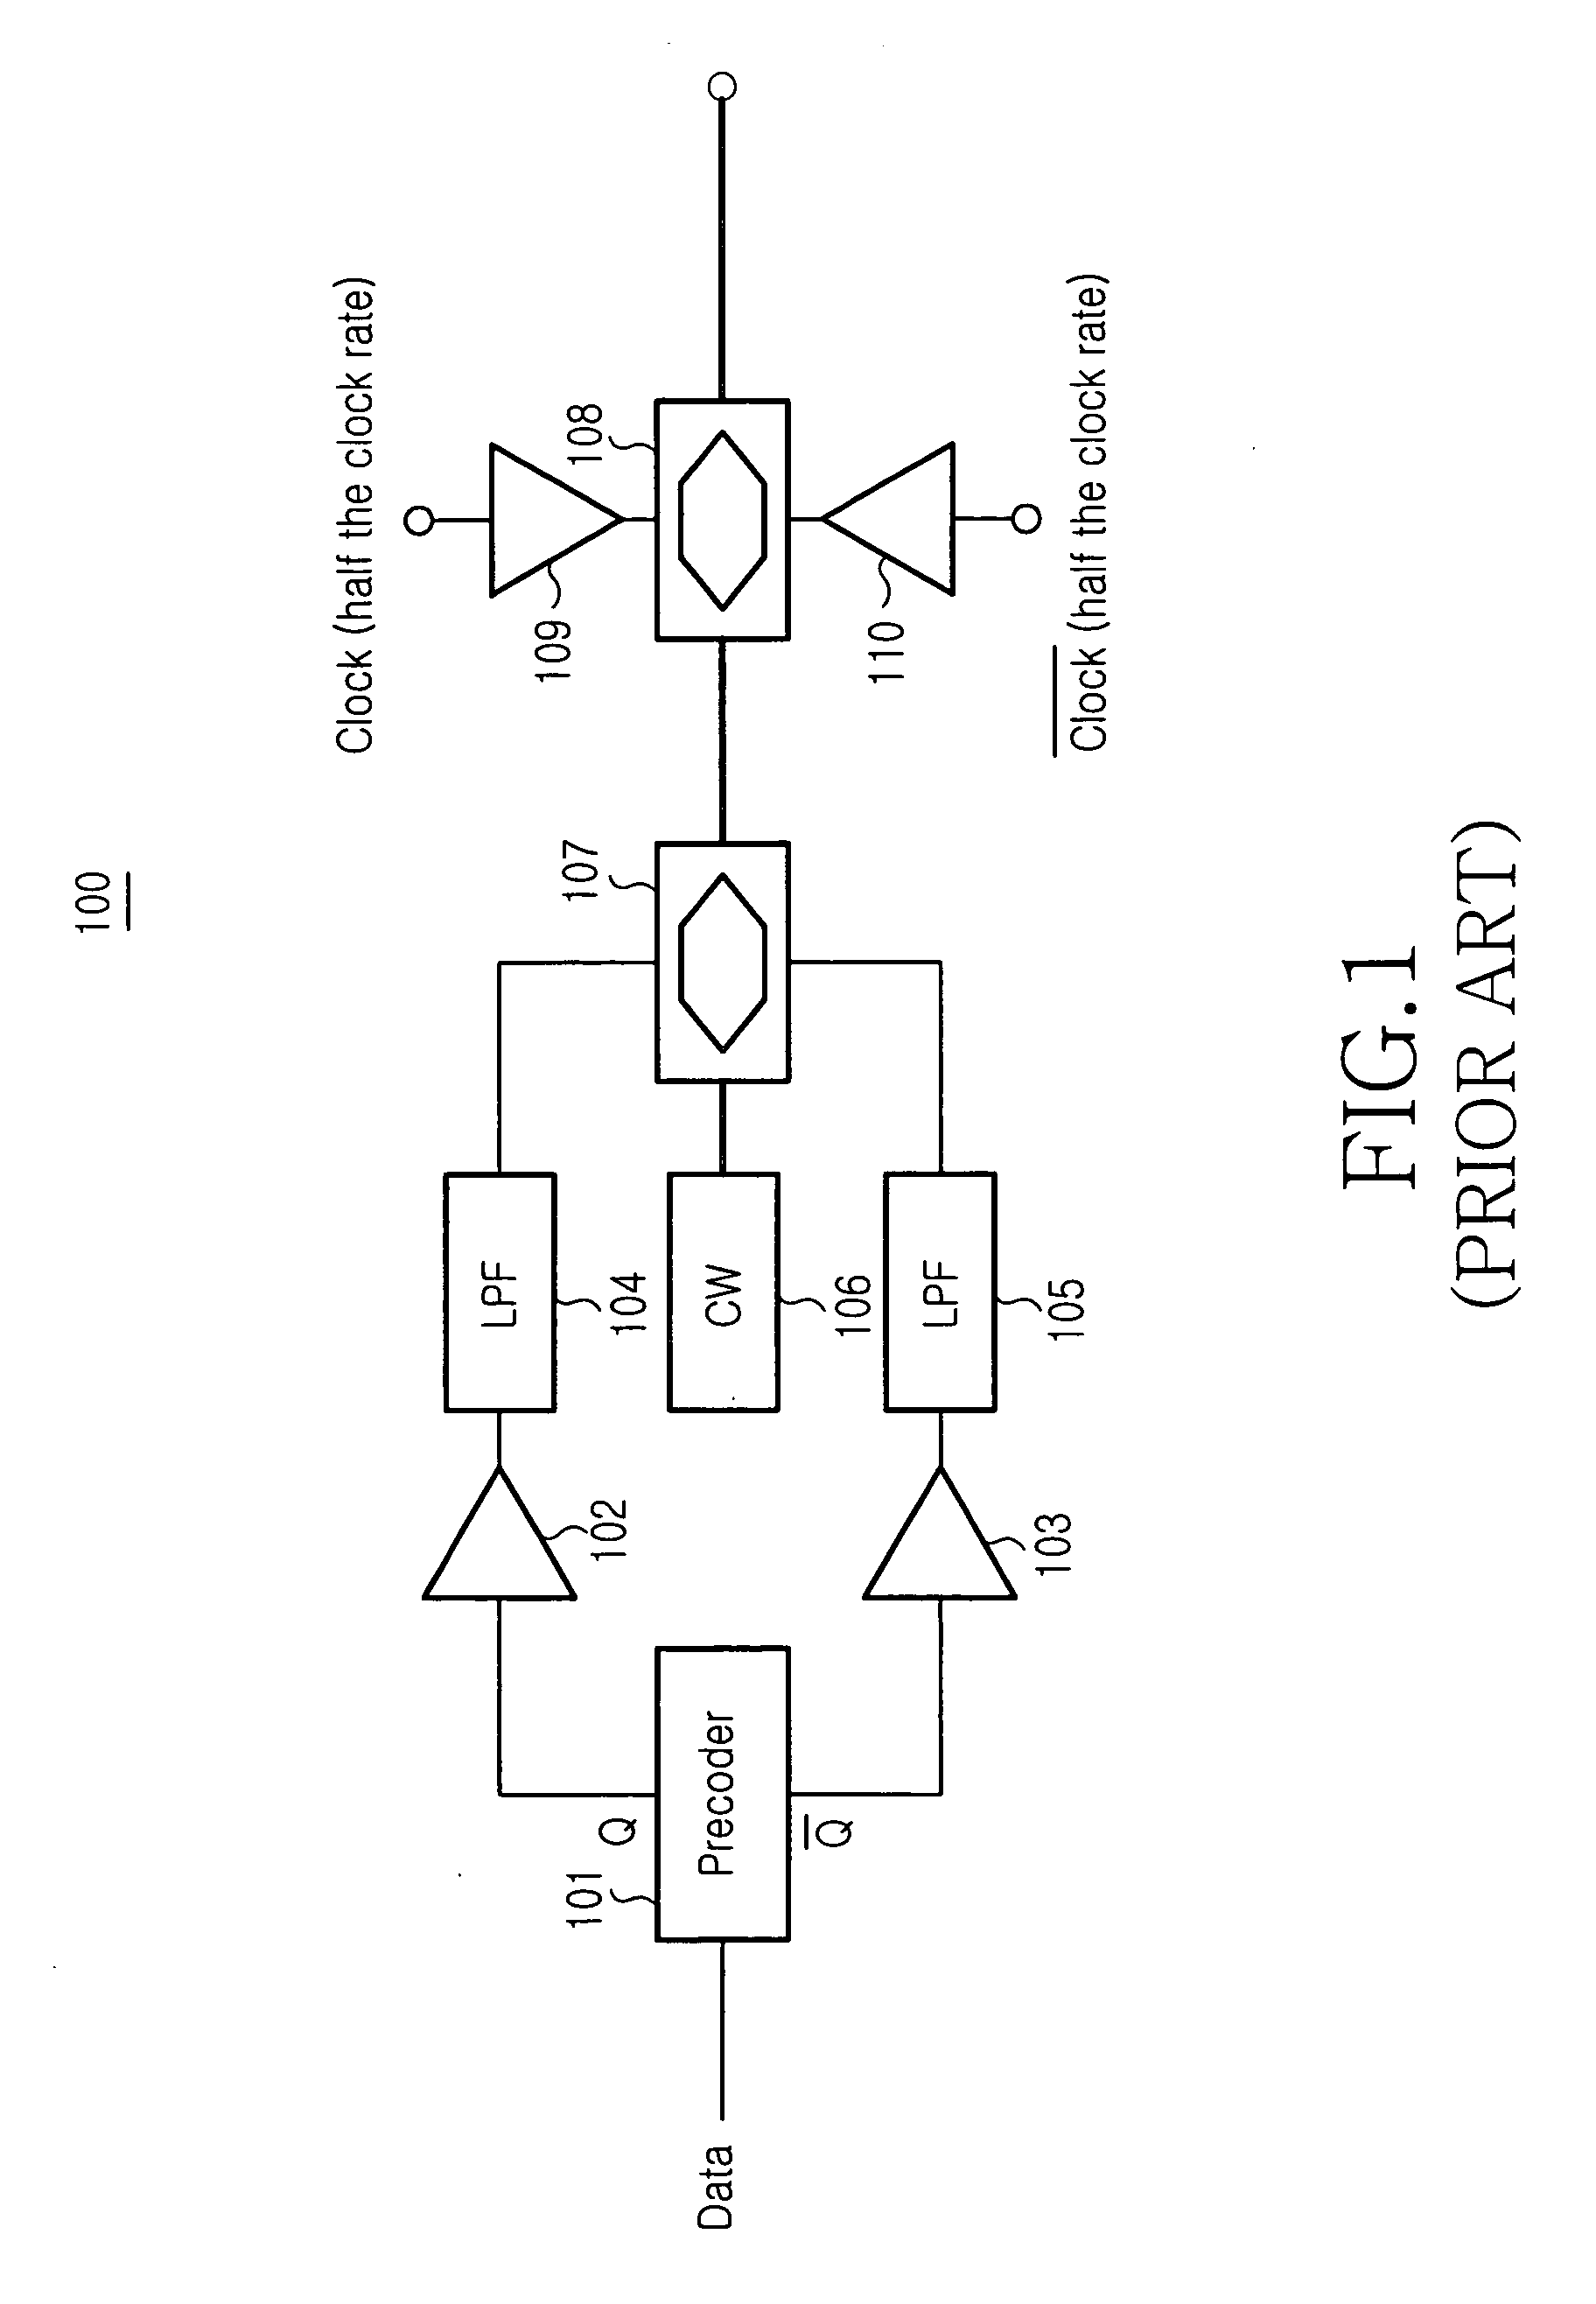 Optical transmitter for use in high-density wavelength division multiplexing (WDM) optical transmission system